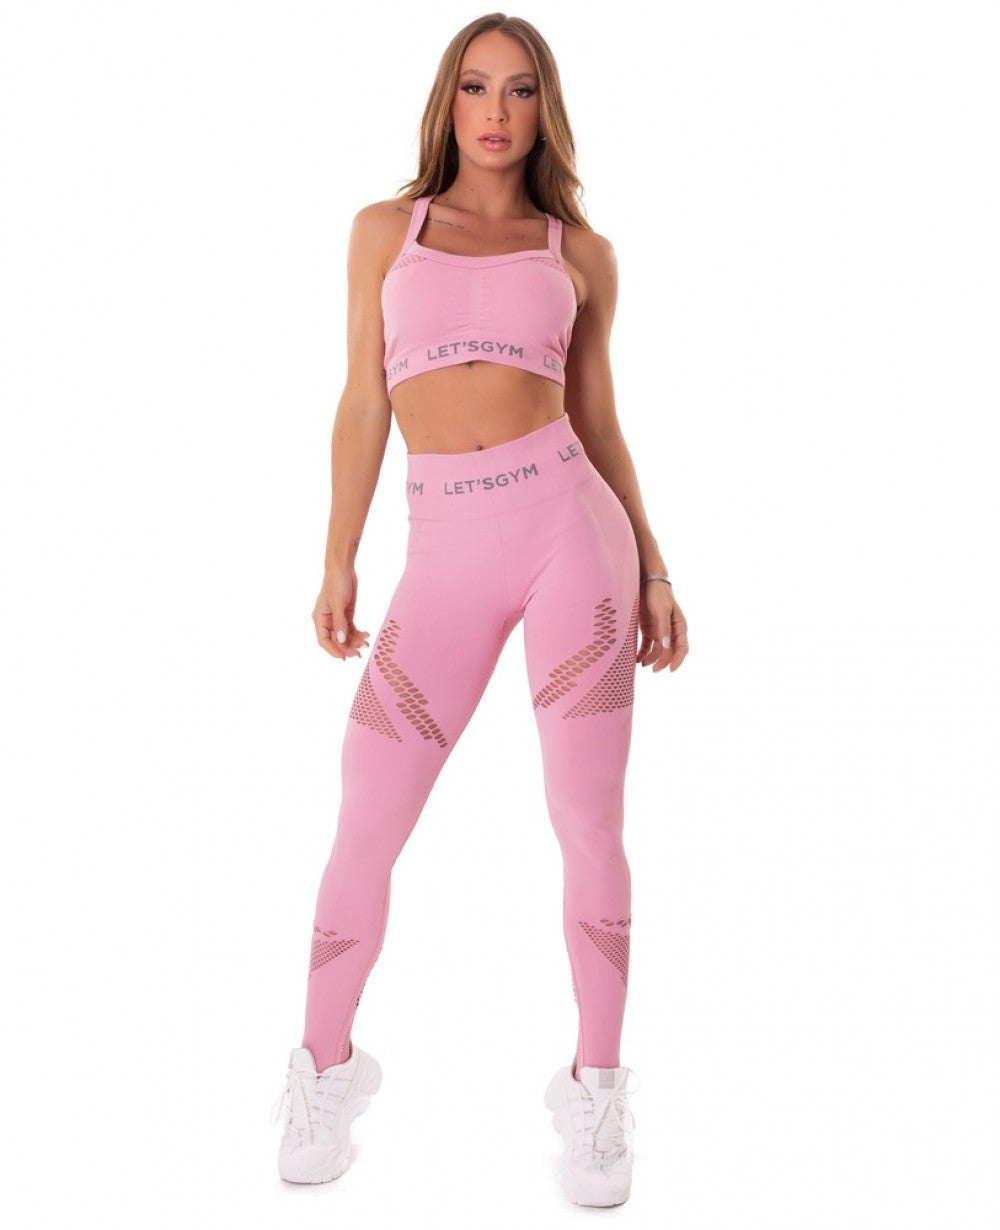 These 13 Matching Workout Sets Are Instant Outfits | Nike women fashion,  Workout attire, Workout clothes